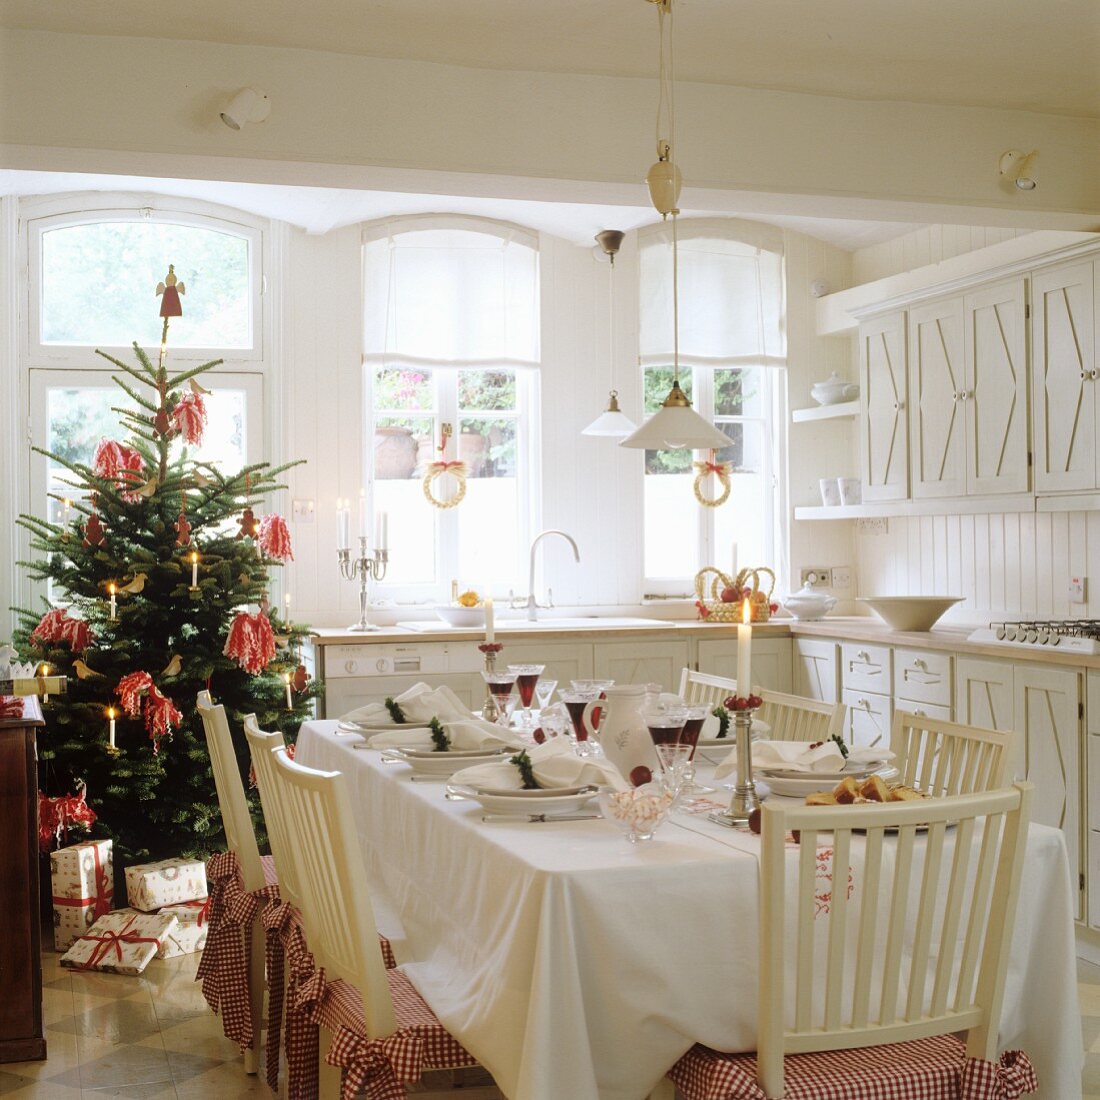 Festively set table and Christmas tree in country-house kitchen